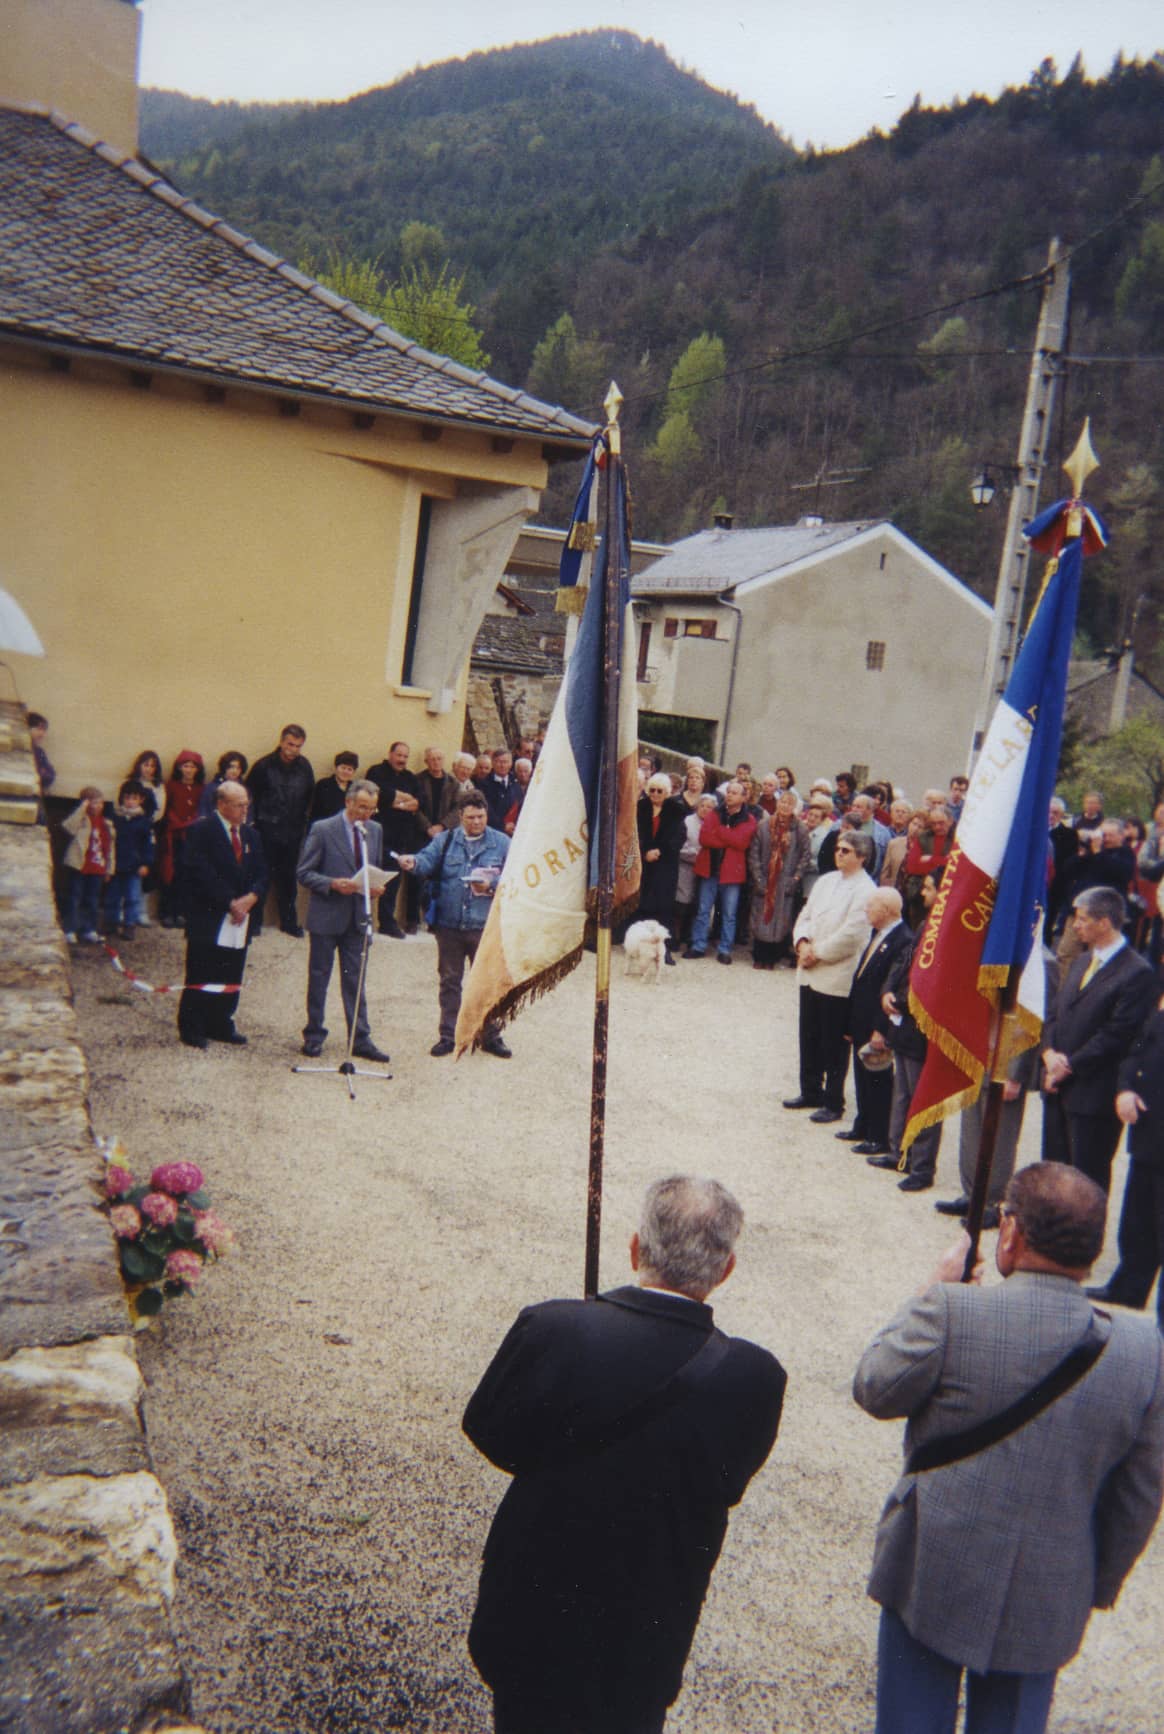 Ceremony of the placing of a plaque in memory of Simone Serriere in her village La Salle-Prunet, 2 May 2004